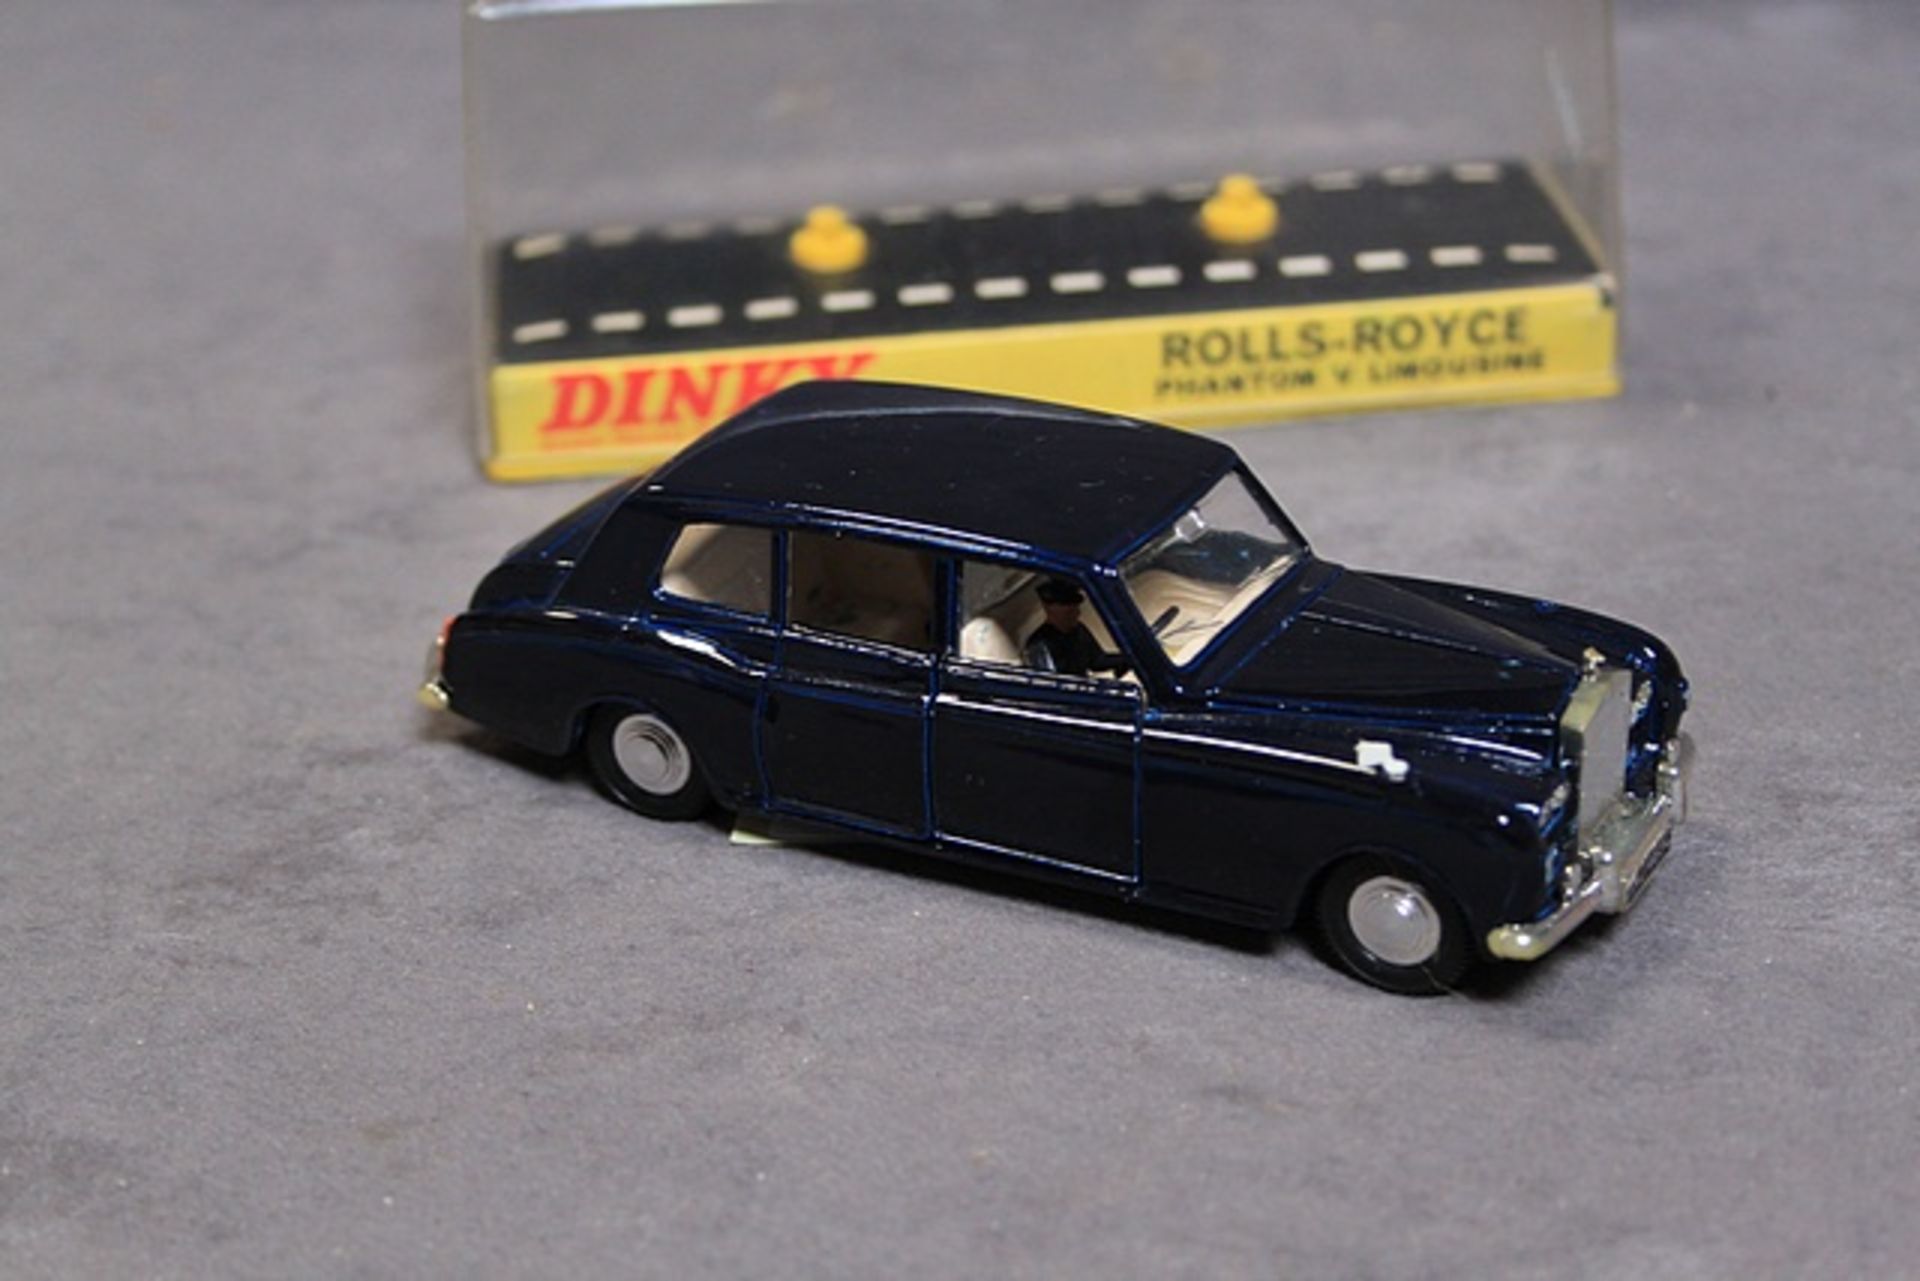 Mint Dinky Diecast #152 Rolls Royce Phantom V Limousine With Driver in display case